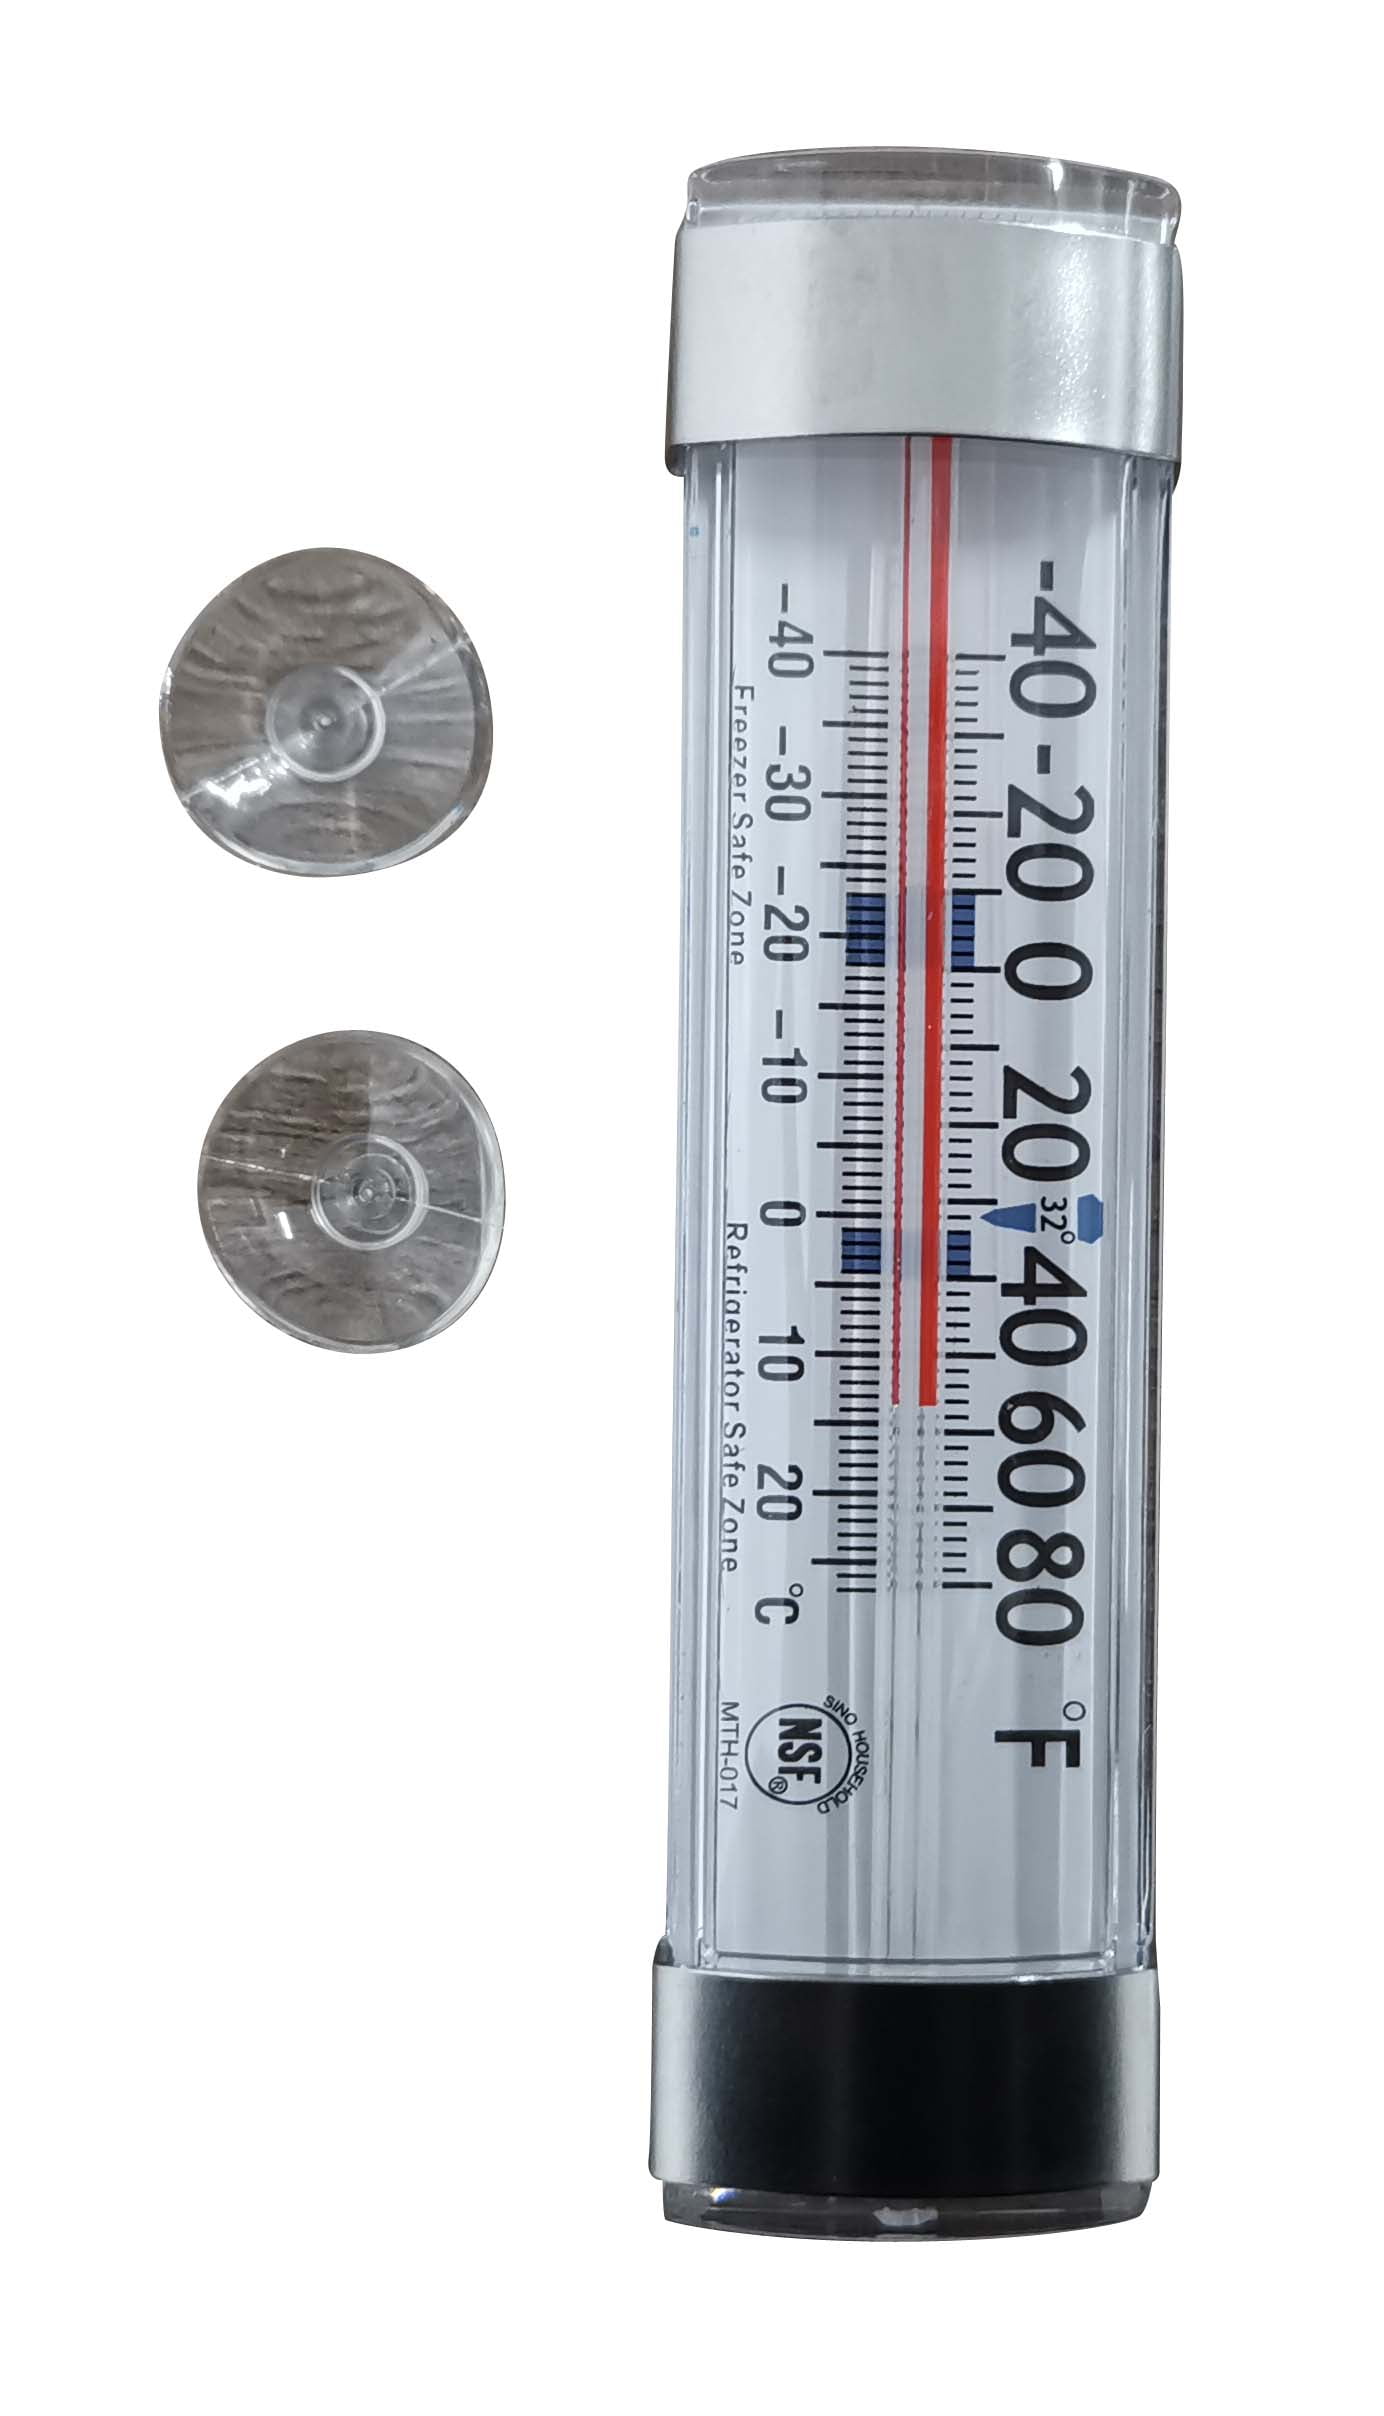 Fridge and Freezer Thermometer with High / Low function - Fifth Day  Accessories